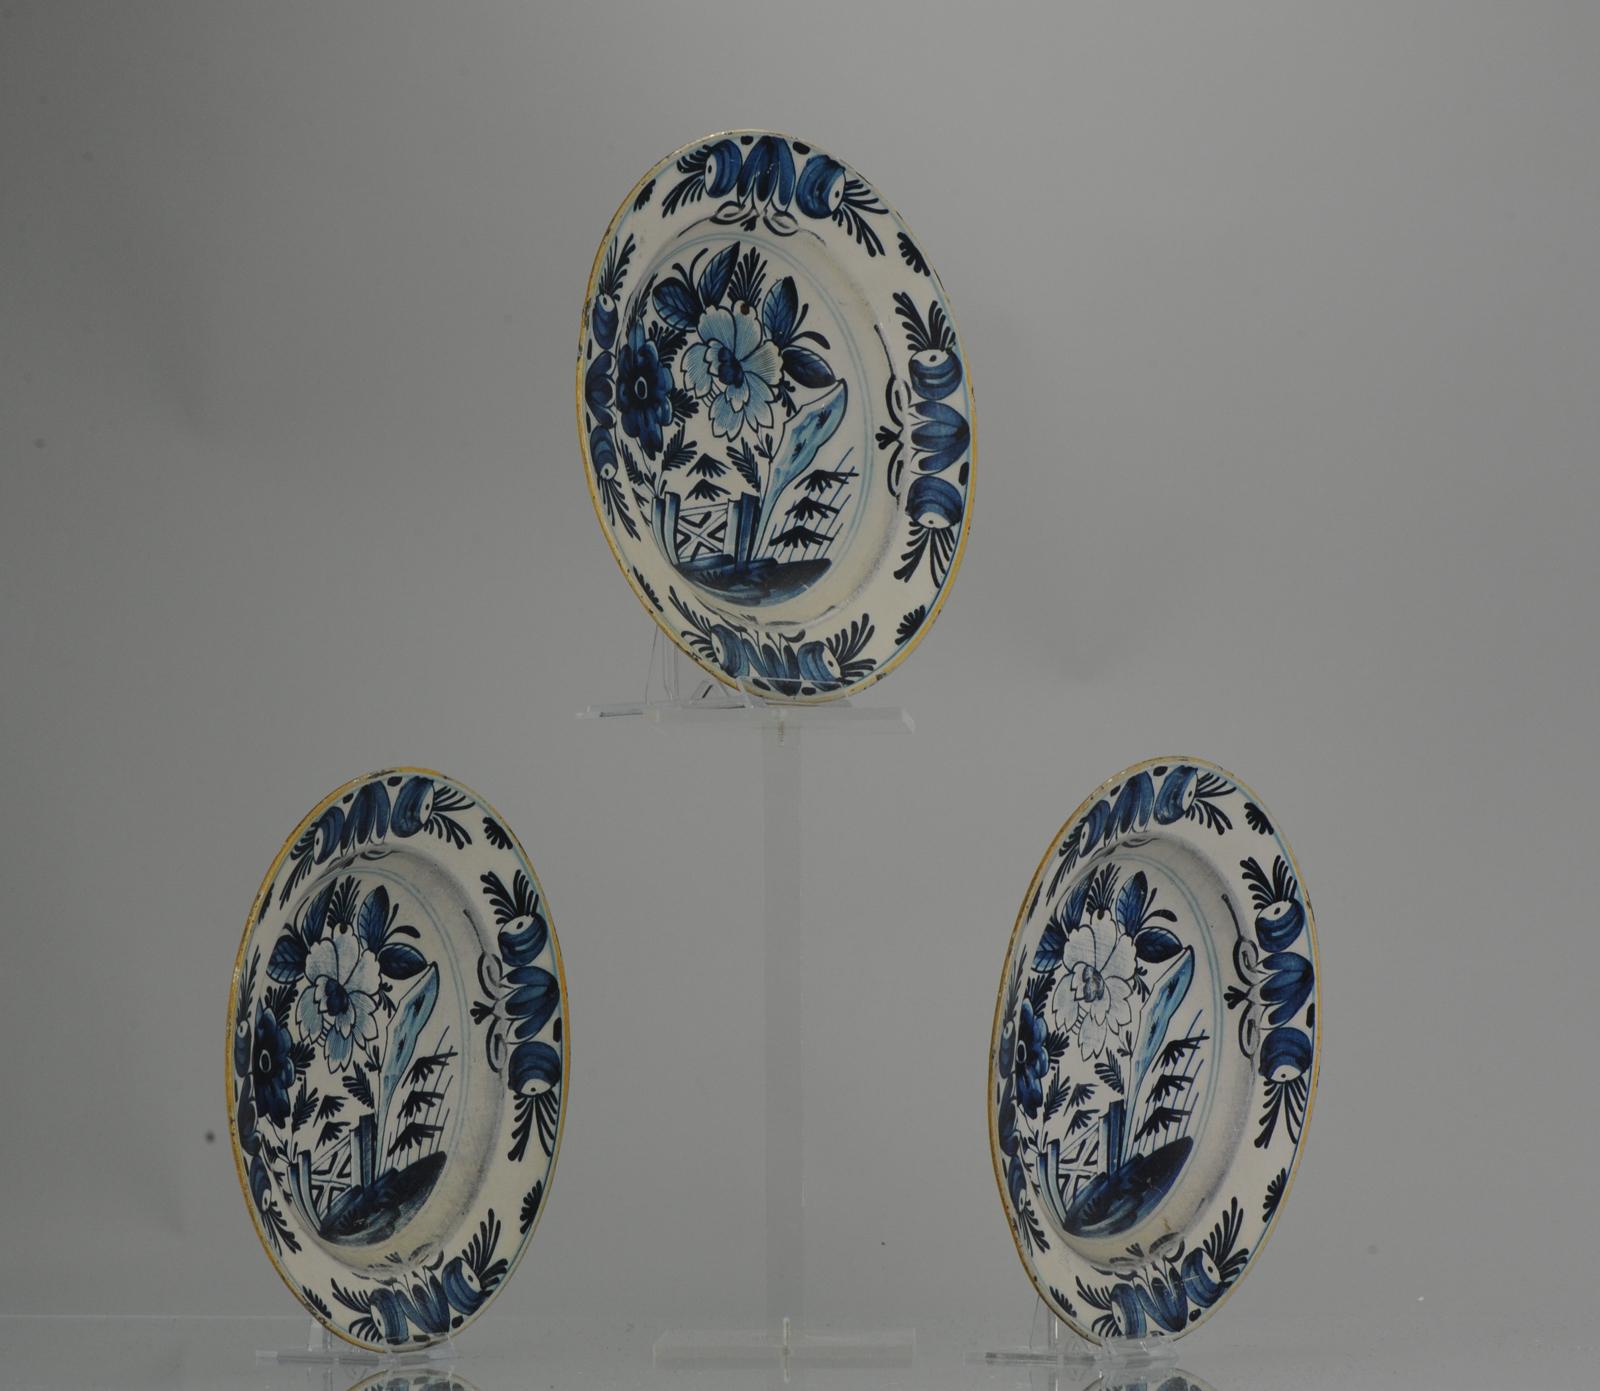 Very cool set of 20C Delft Tin plate.

Additional information:
Type: Vase
Region of Origin: Holland
Period: 19th century, 20th century
Condition: Age/Use signs like scratches and missing enamel.
Dimension: Ø 22.7 x 3.3 H cm